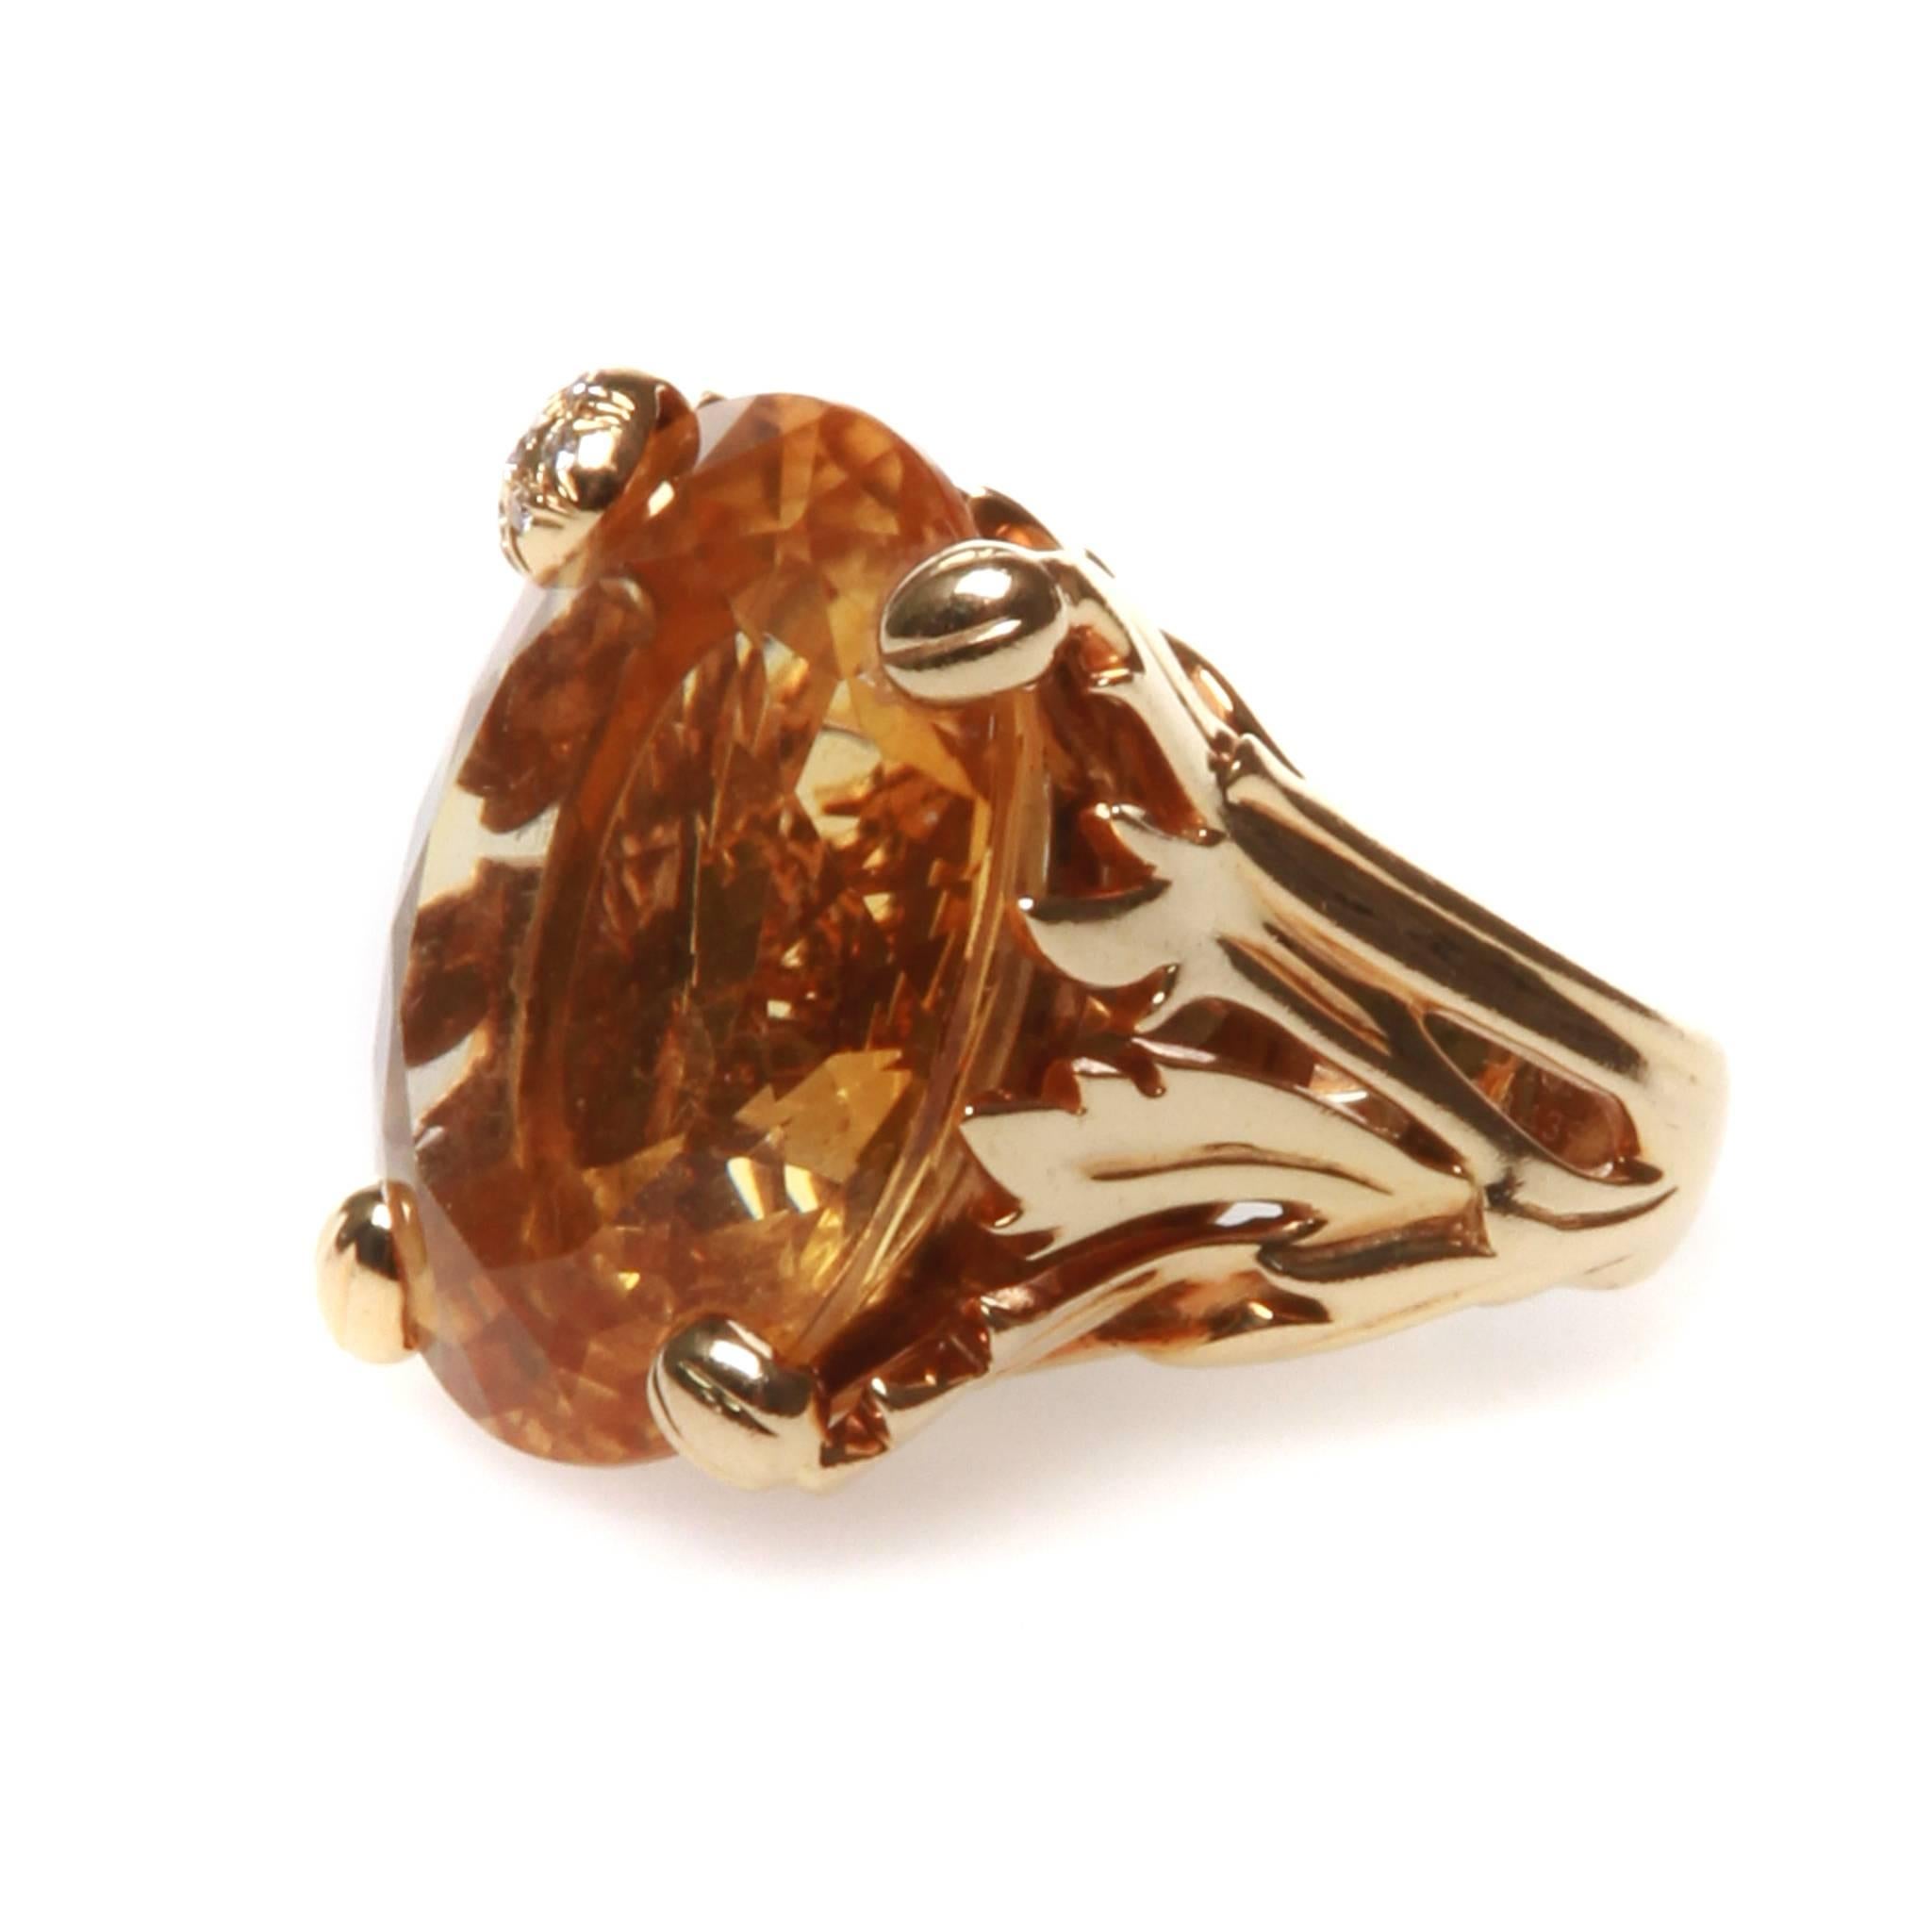 'Miss Dior' large 18k yellow gold ring with 26.5mm x 23mm x 10mm oval citrine gemstone and diamonds. Ring size 6 1/2, ring top is 27mm x 21mm. 

Engraved: Dior 750 A 843 97 52